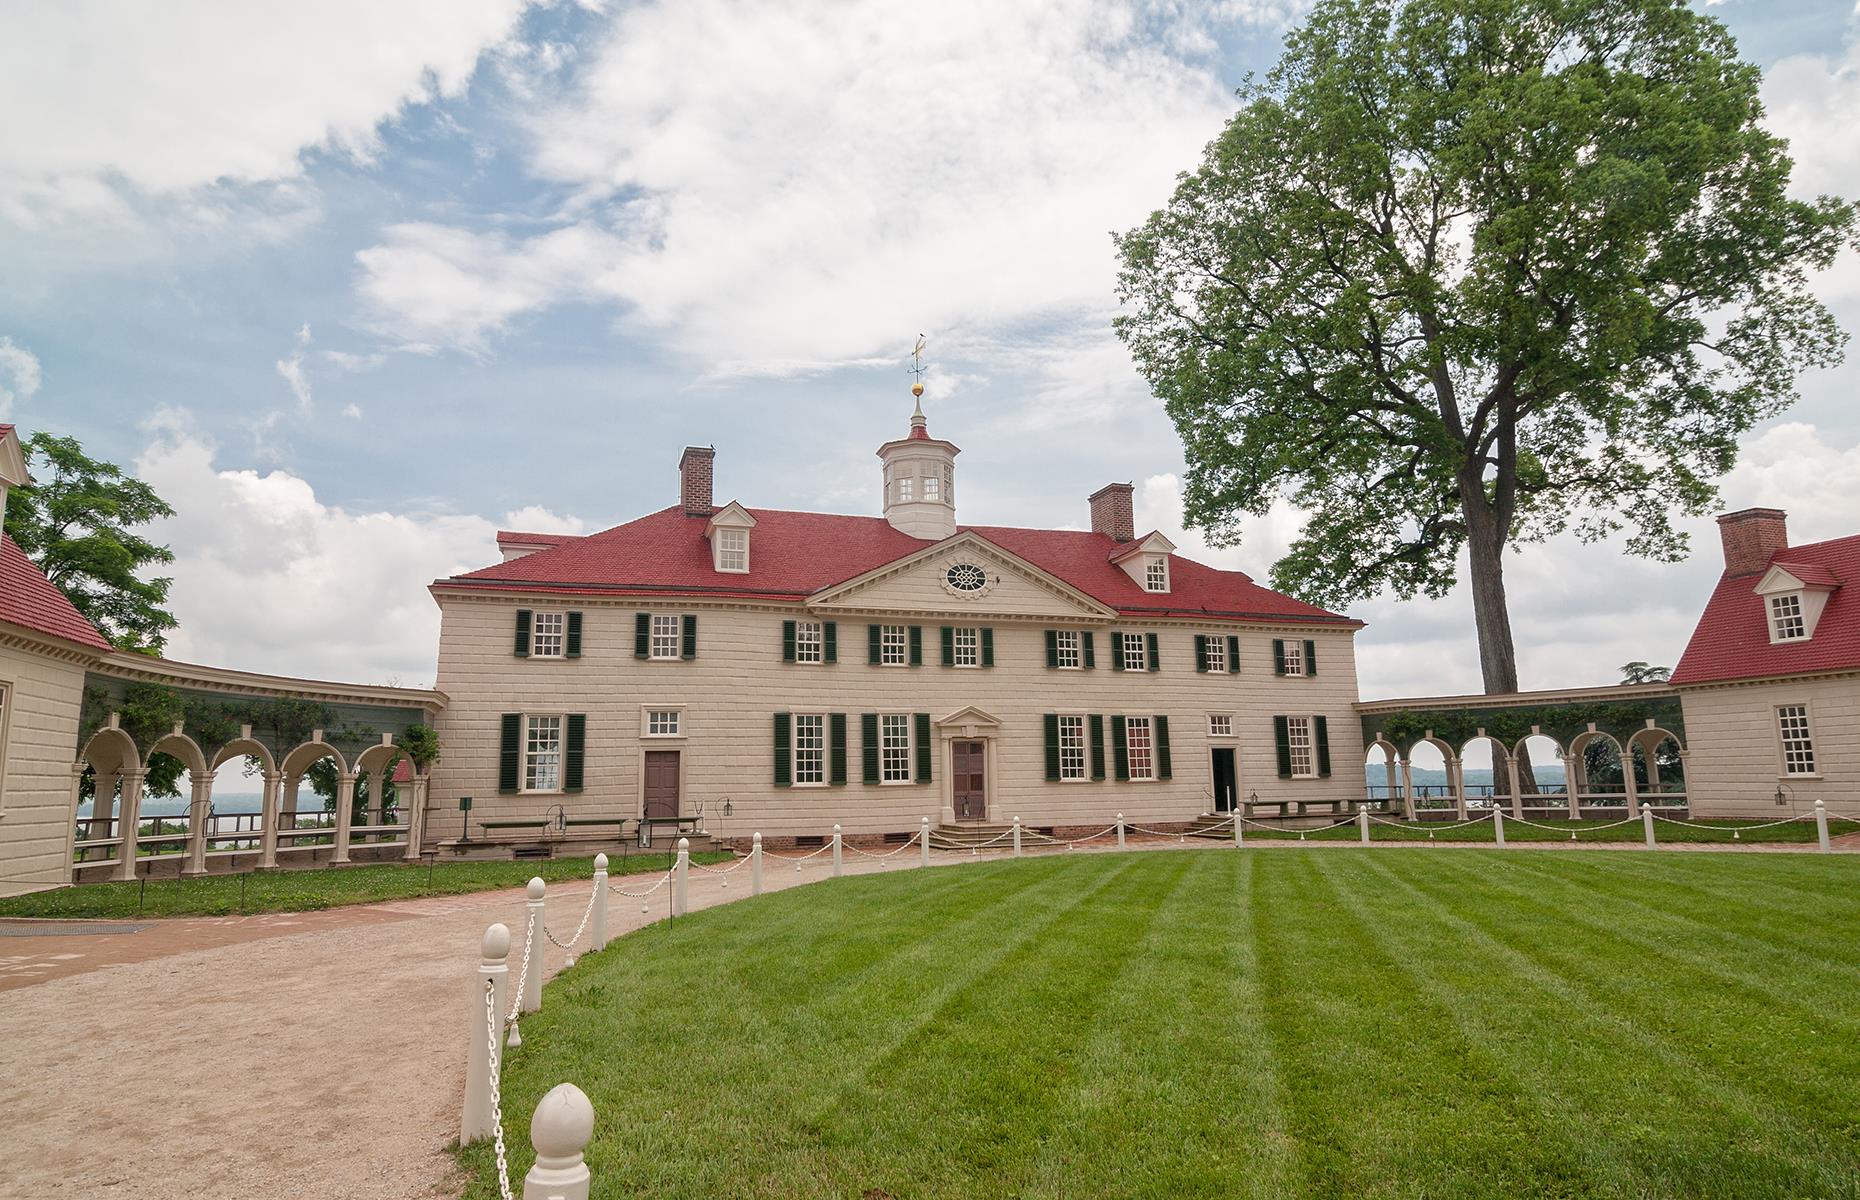 <p>The estate owned by the first President of the United States George Washington is now a comprehensive museum, looking at Washington's life and also offering a peek at how people lived in the second half of 1700s. This detailed <a href="https://virtualtour.mountvernon.org/">virtual tour</a> takes visitors through the buildings on the estate and allows you to discover the interiors too. Each room has an accompanying fact box and there are several videos to guide you along the way.</p>